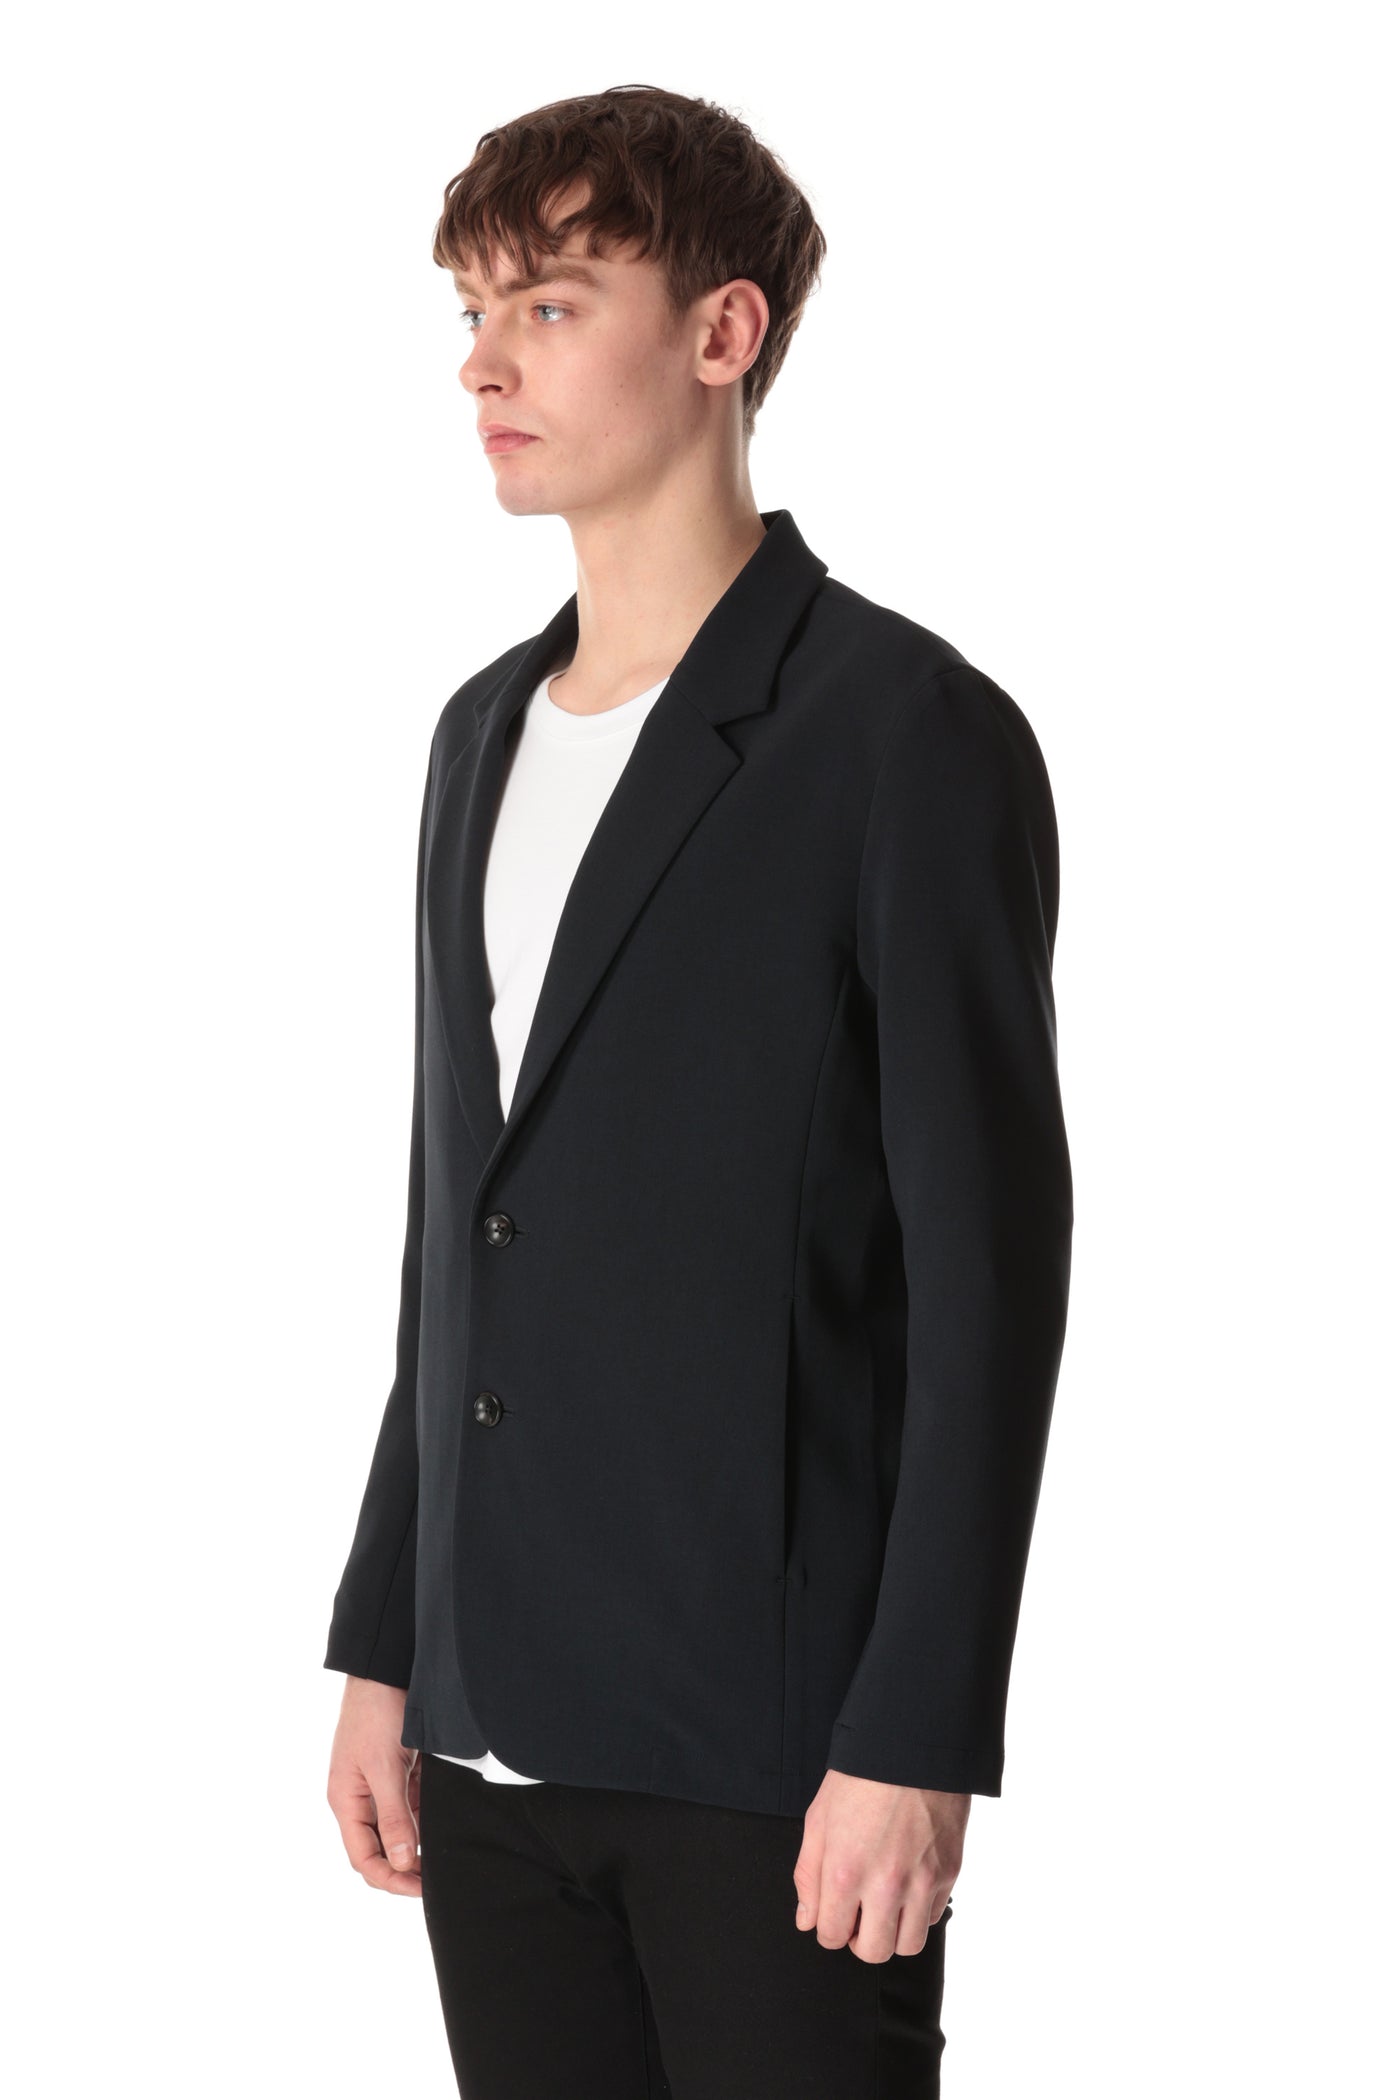 AG32-060 Polyester stretch double cloth 2B jacket